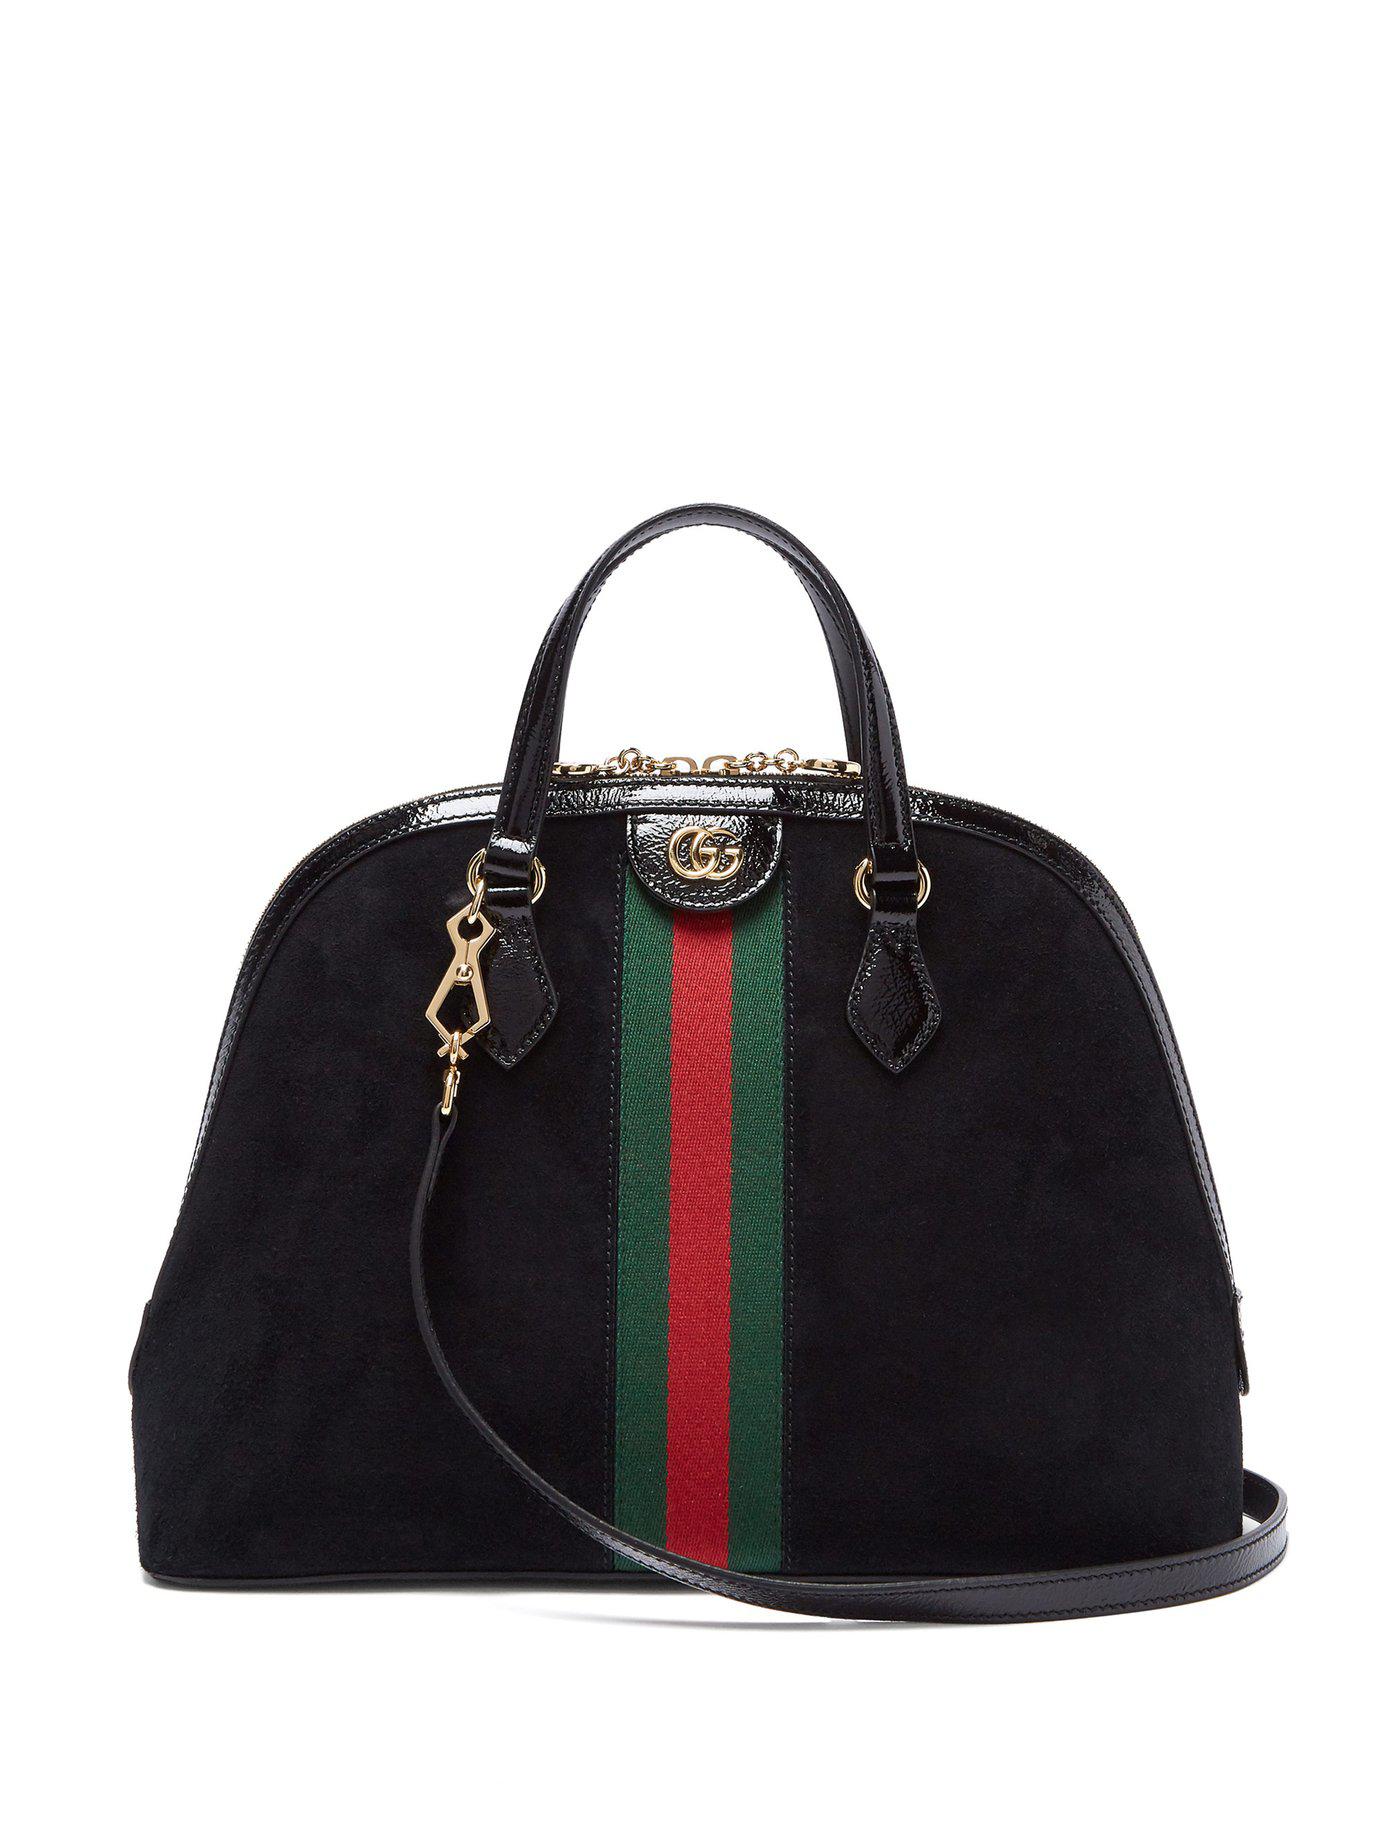 Gucci Ophidia Suede Tote Bag in Black | Lyst